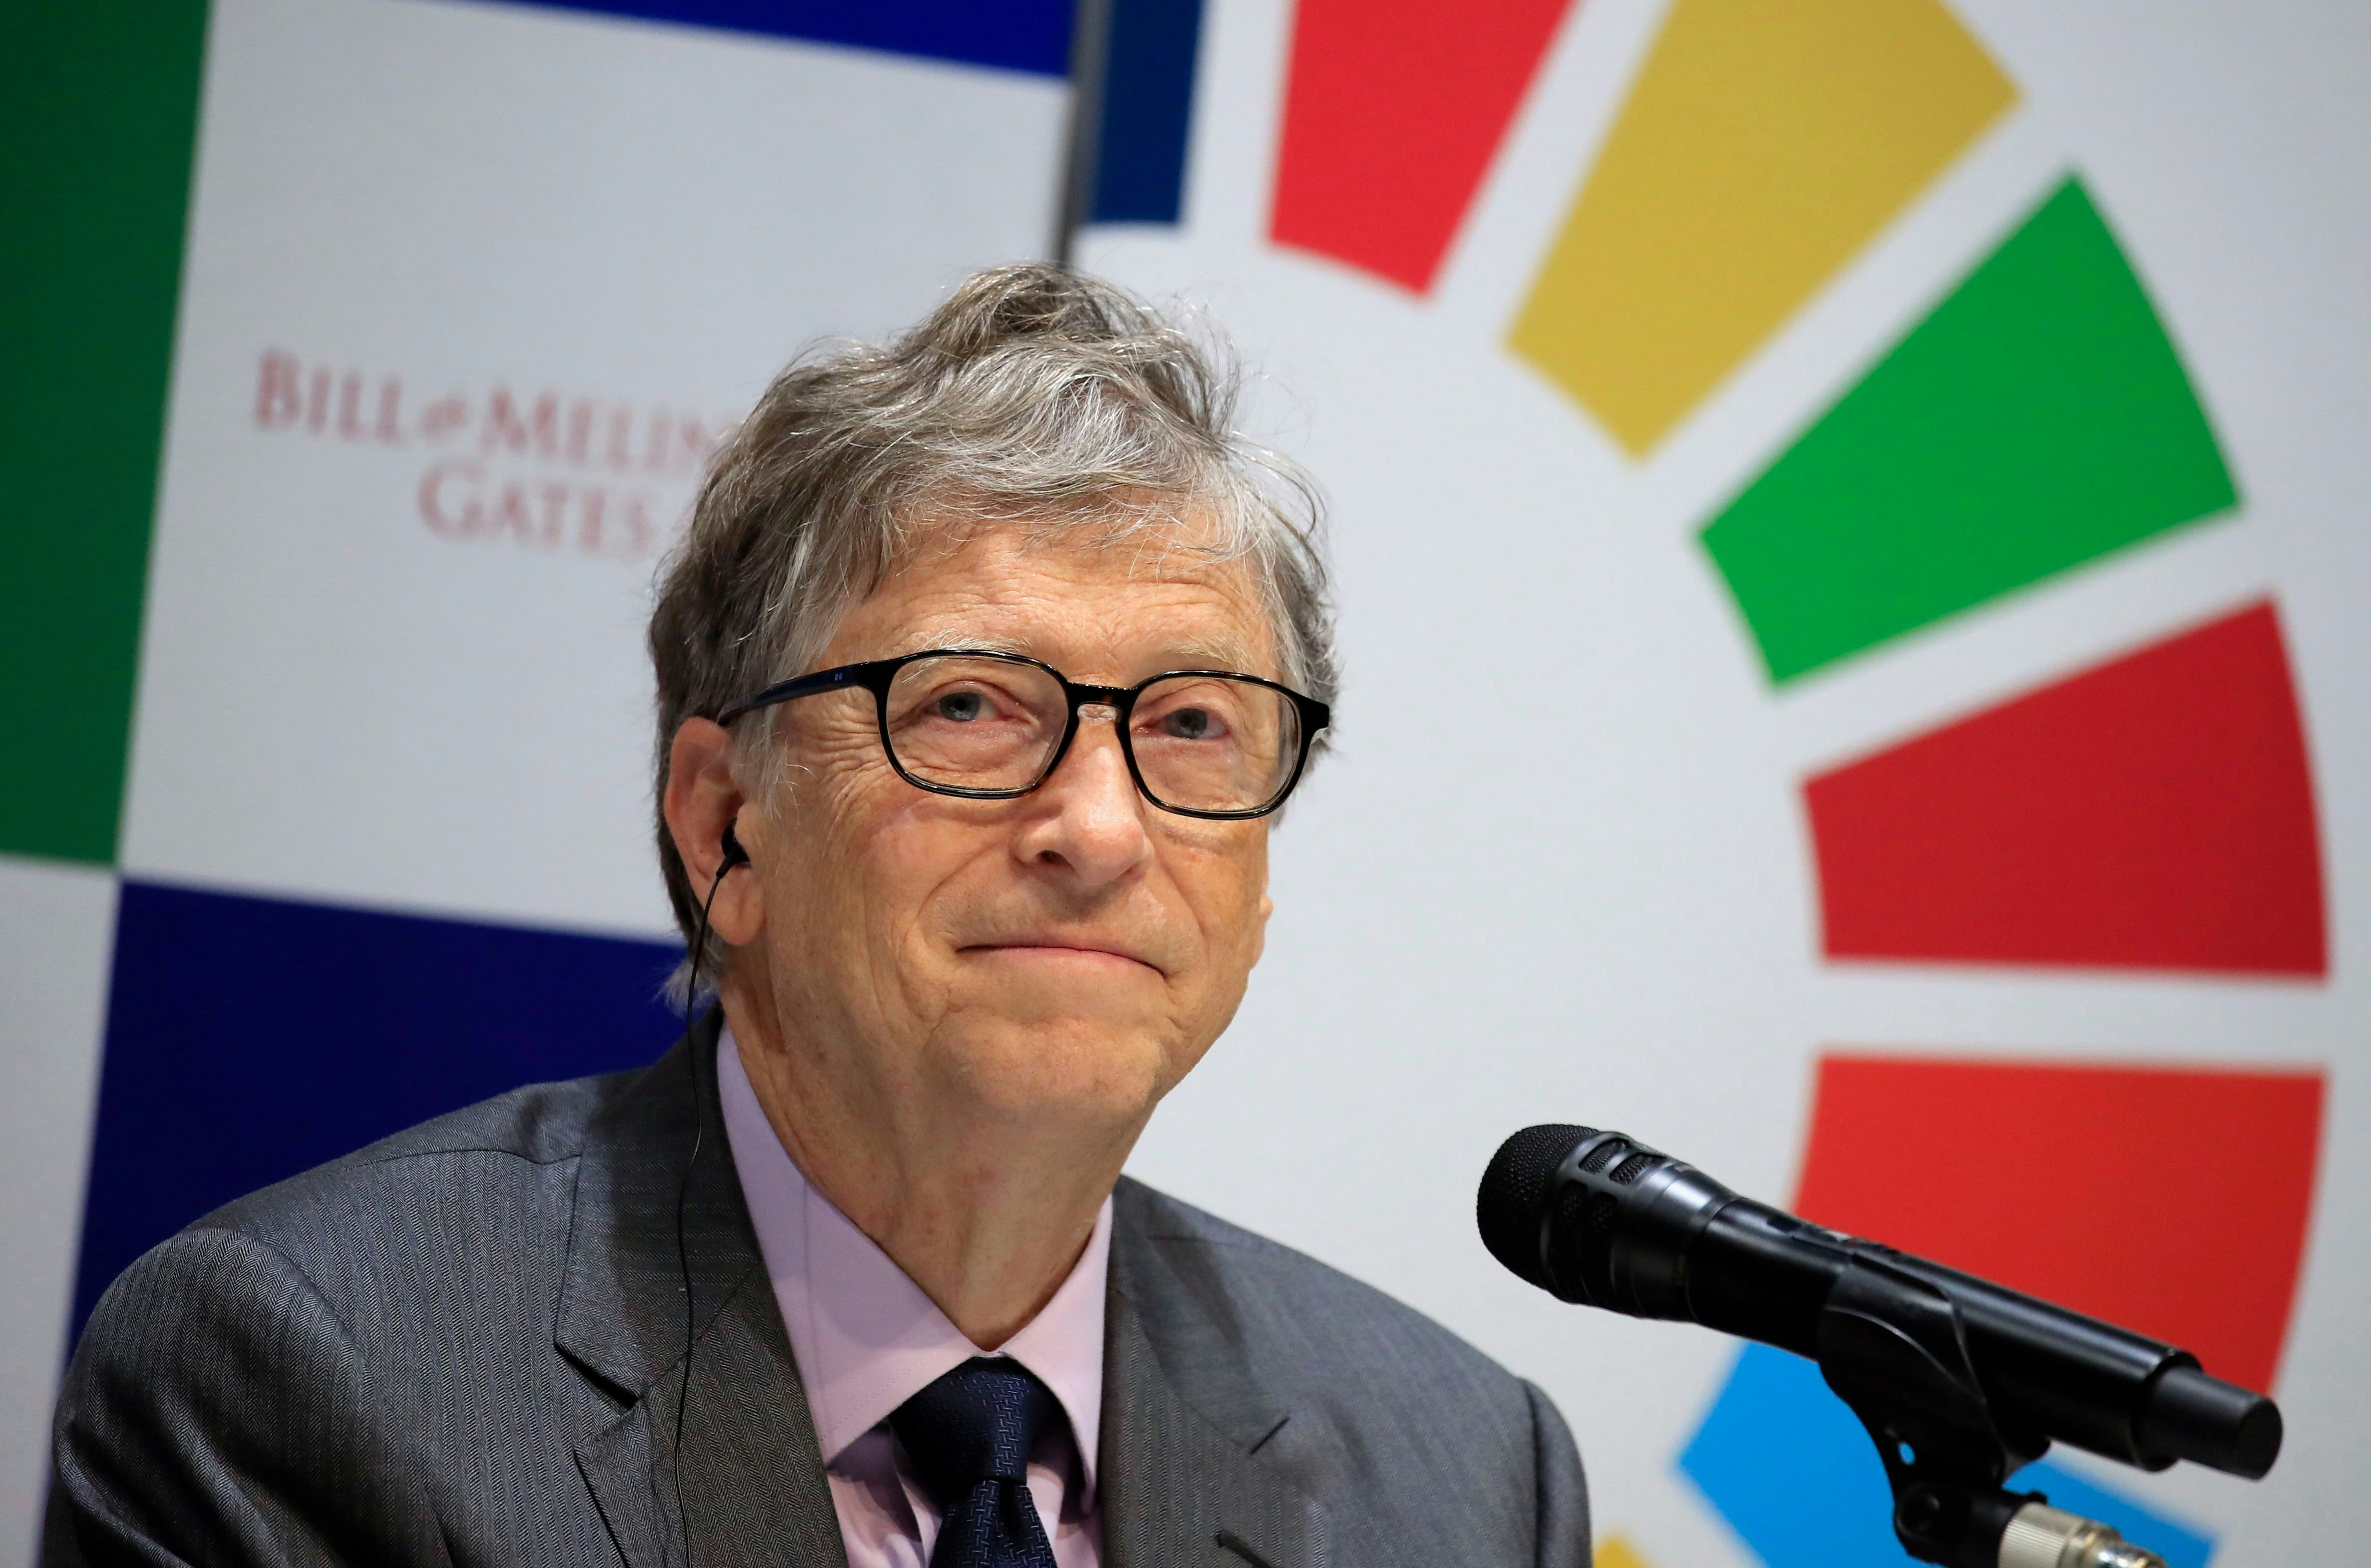 bill gate how to avoid a climate disaster